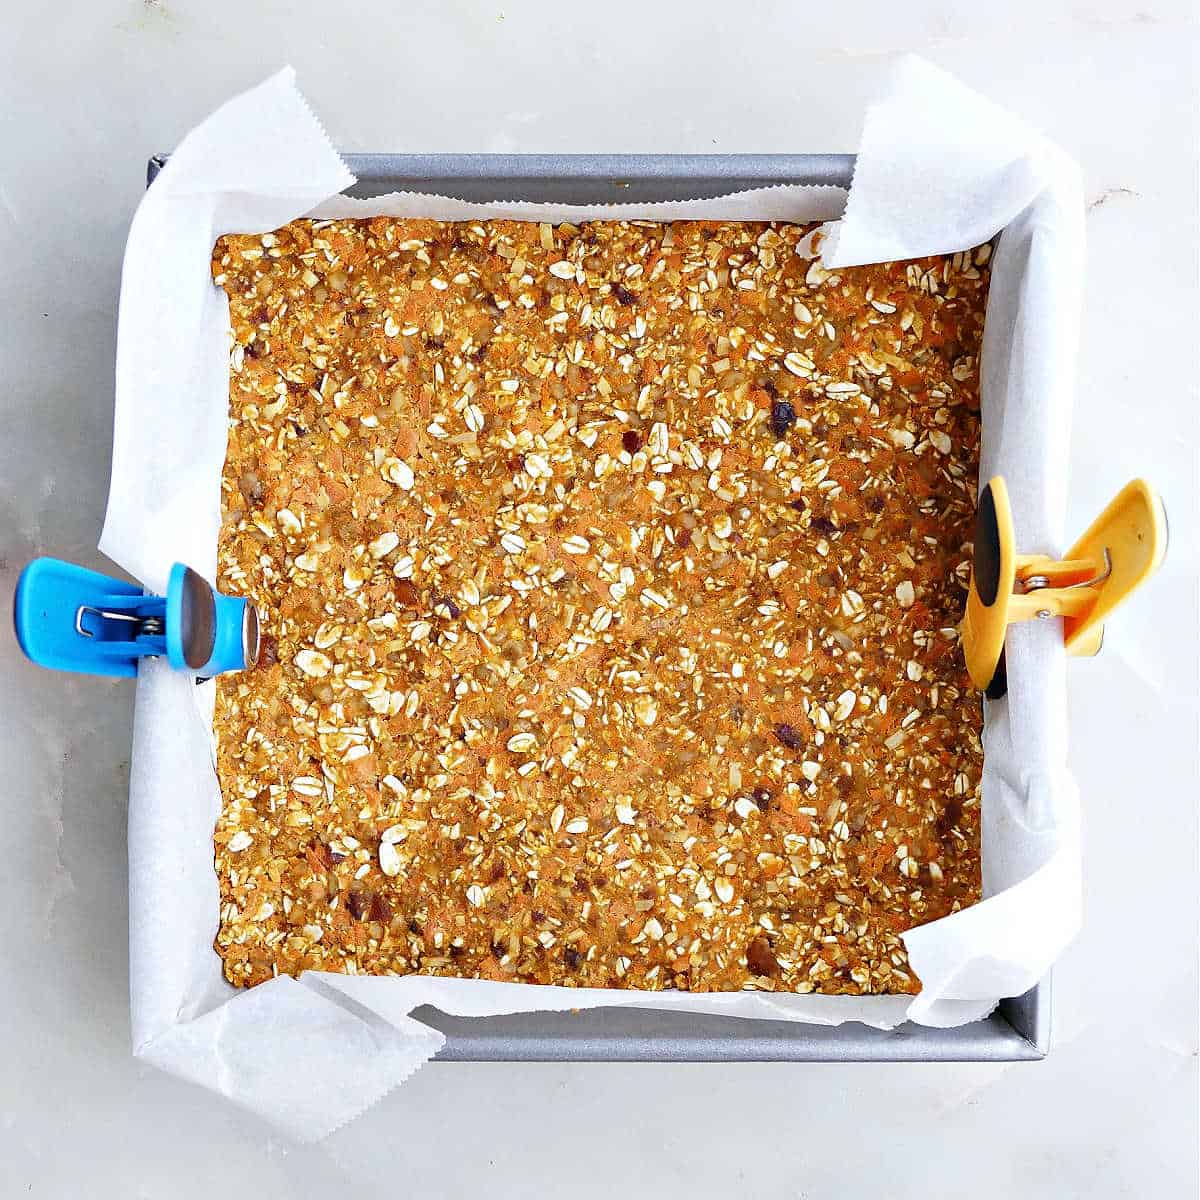 Healthy carrot cake bars in a square baking pan lined with parchment paper.